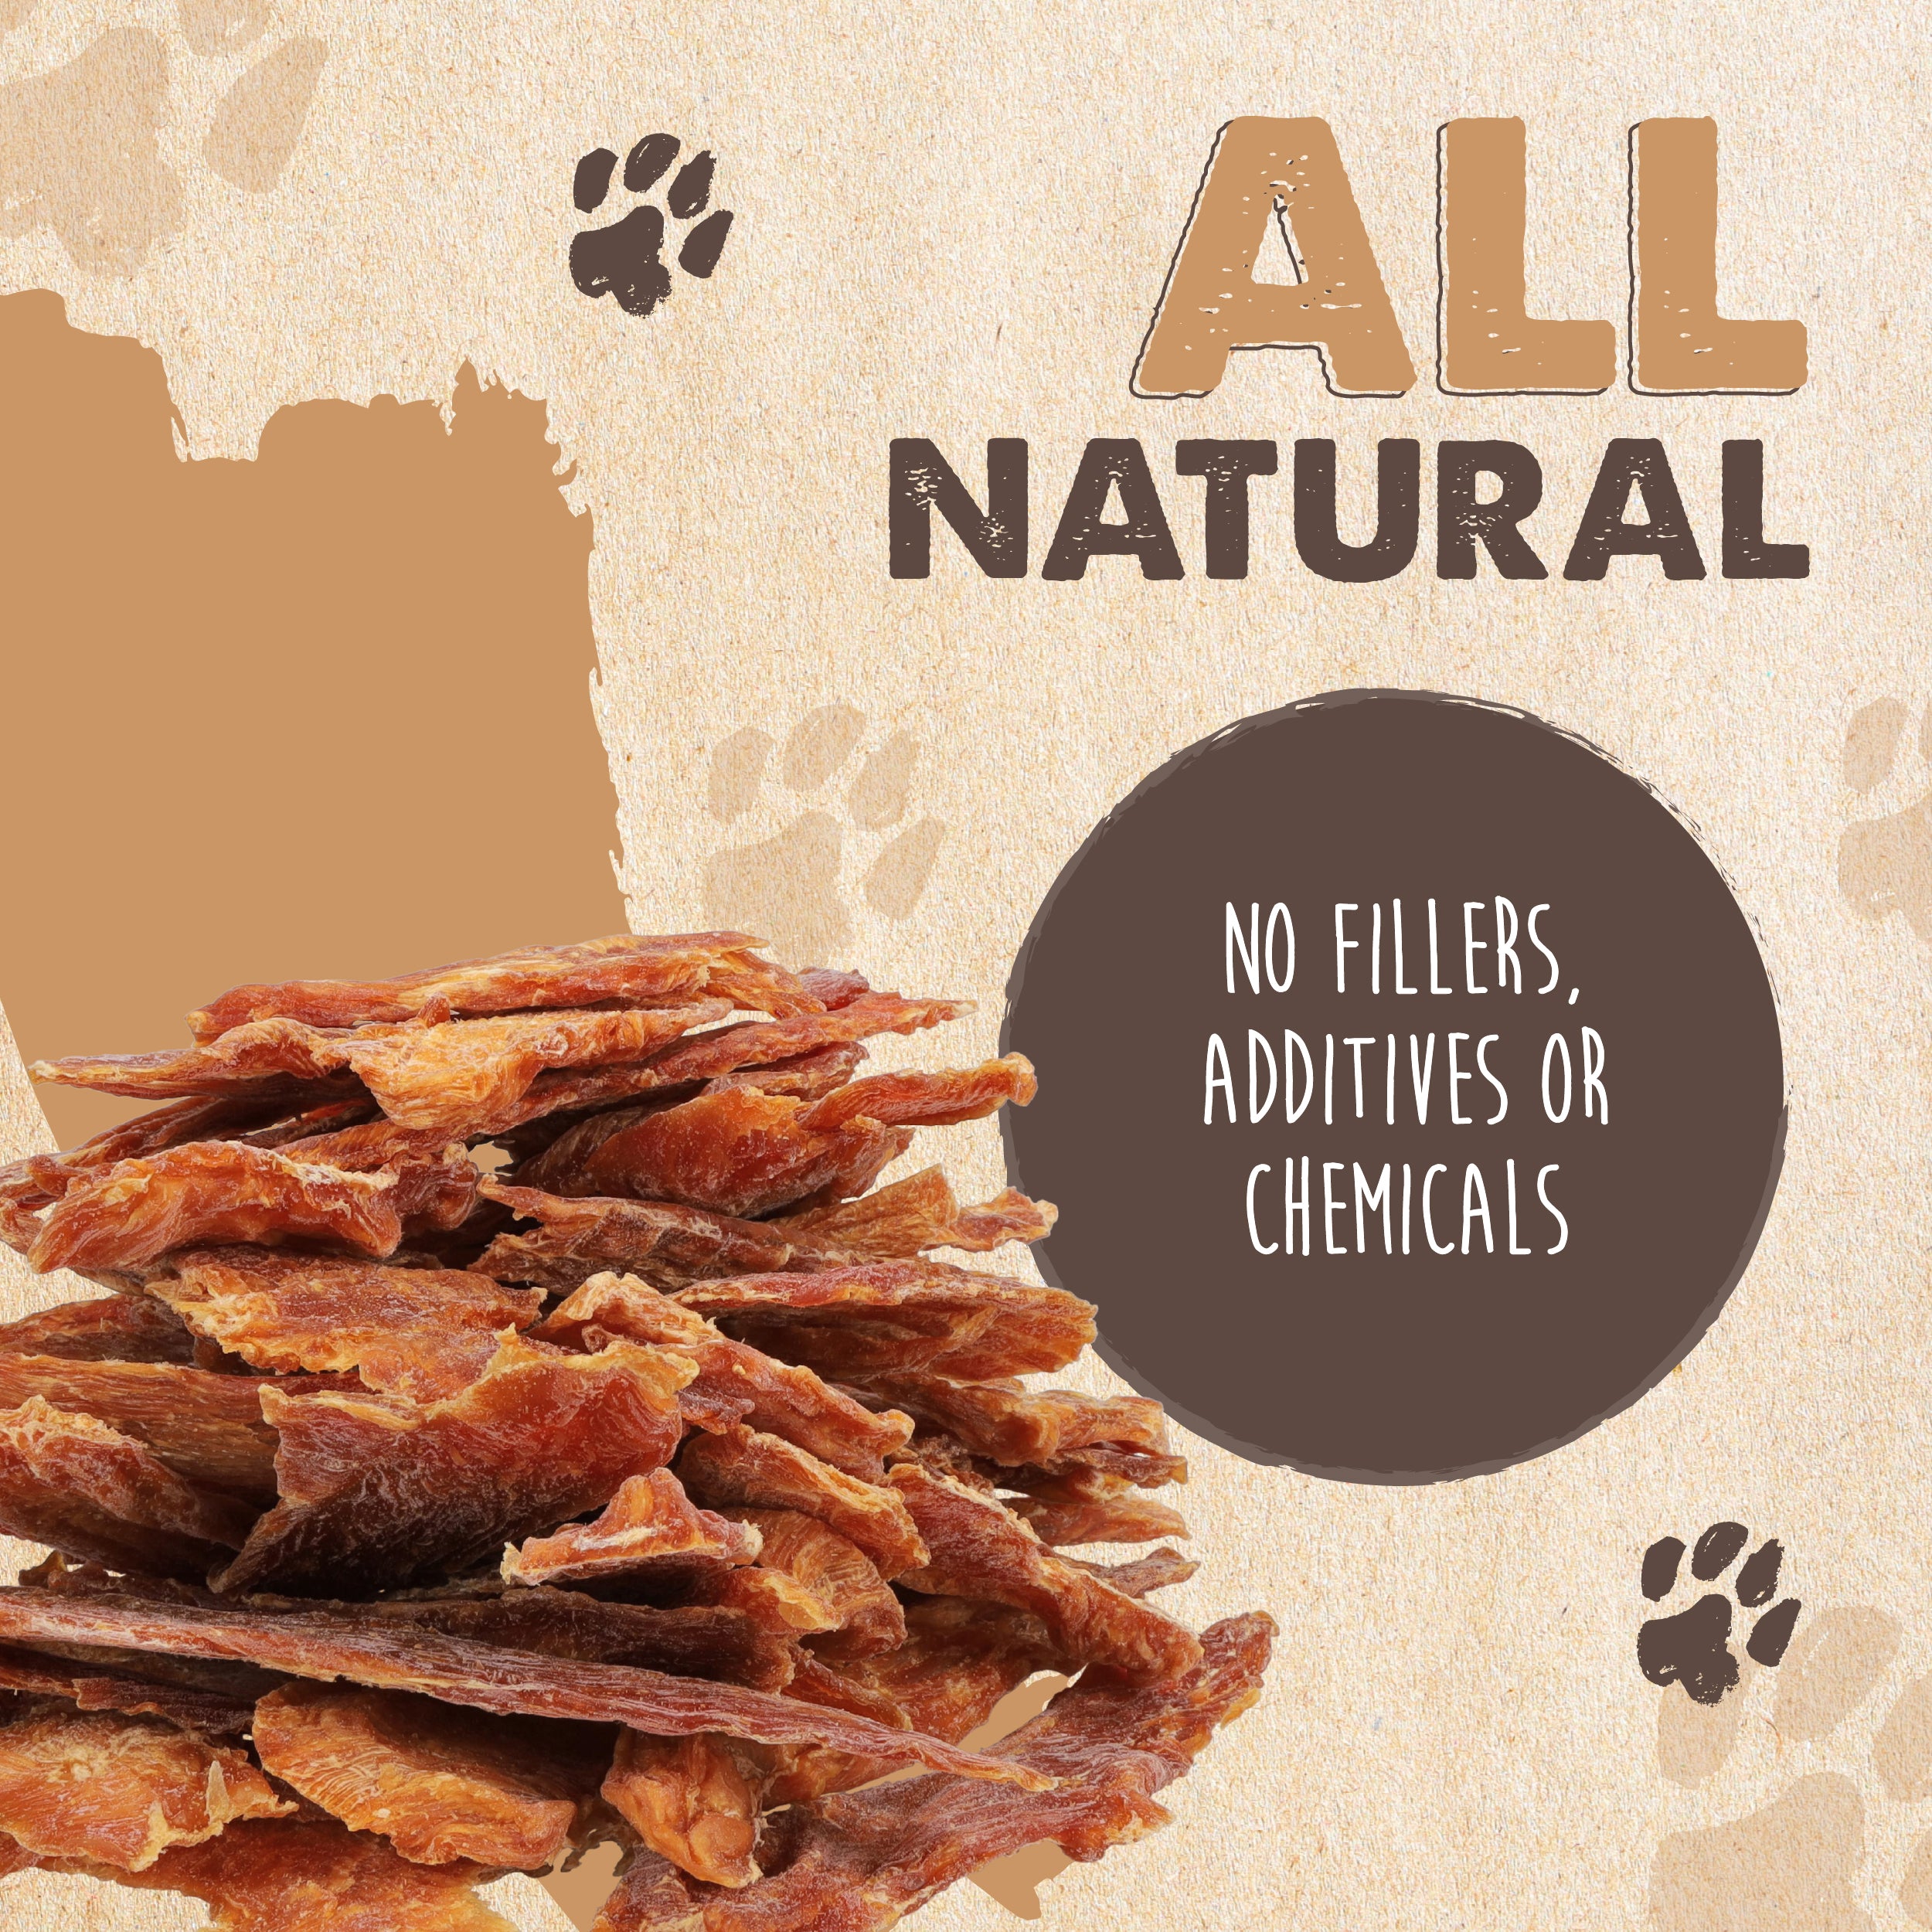 Chicken Jerky for Dogs